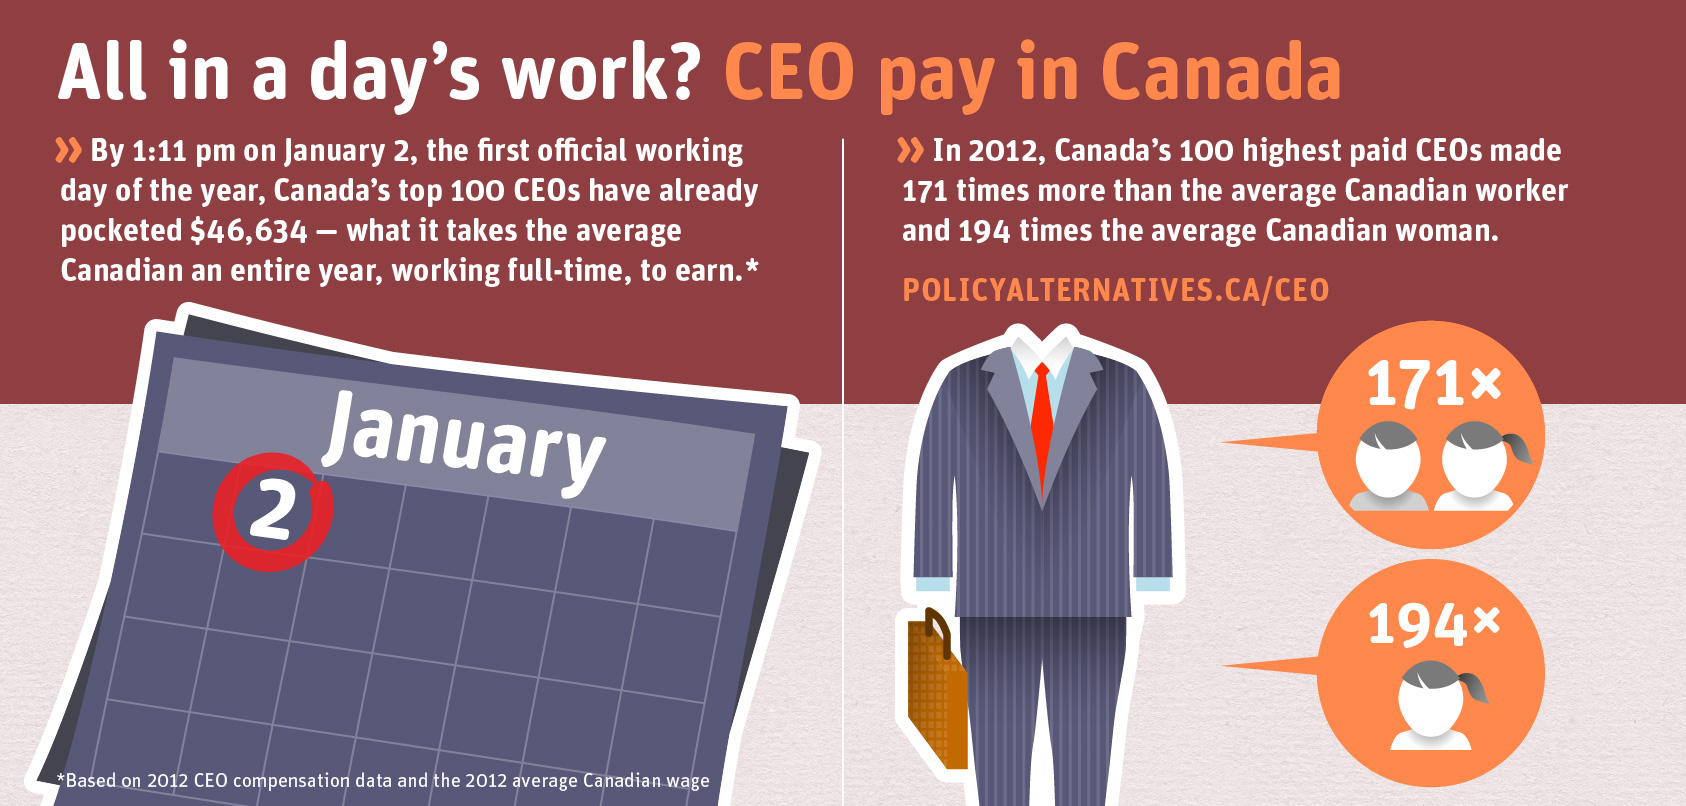 Canadian Centre for Policy Alternatives' Infographic, 2014